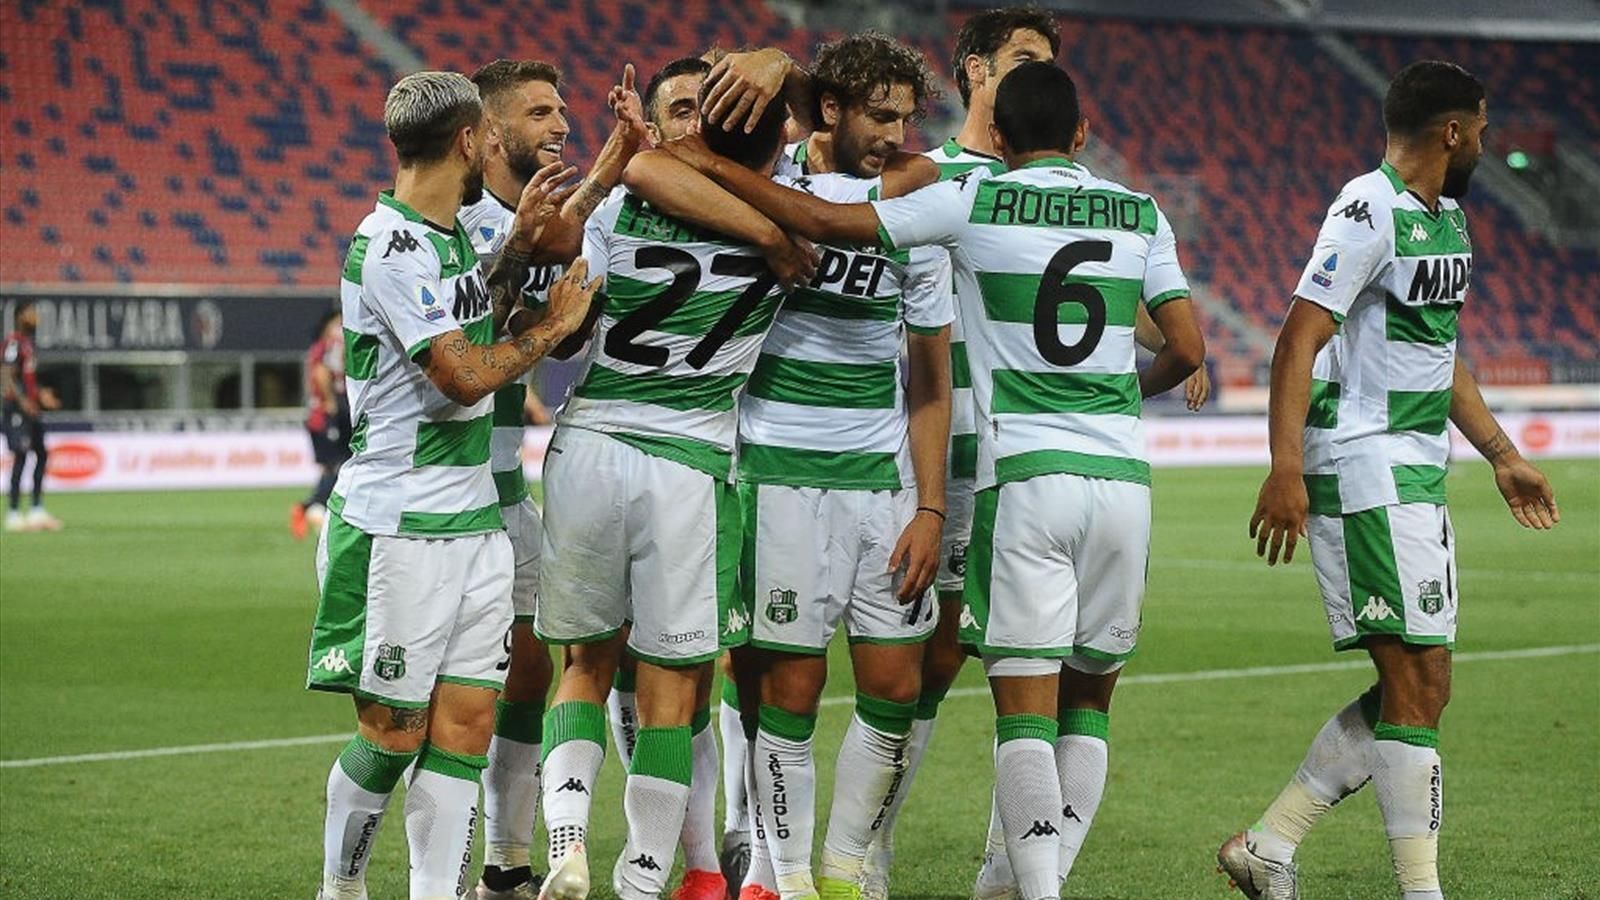 Sassuolo Defeats Bologna at an Away Match of the Emilia-Romagna Derby